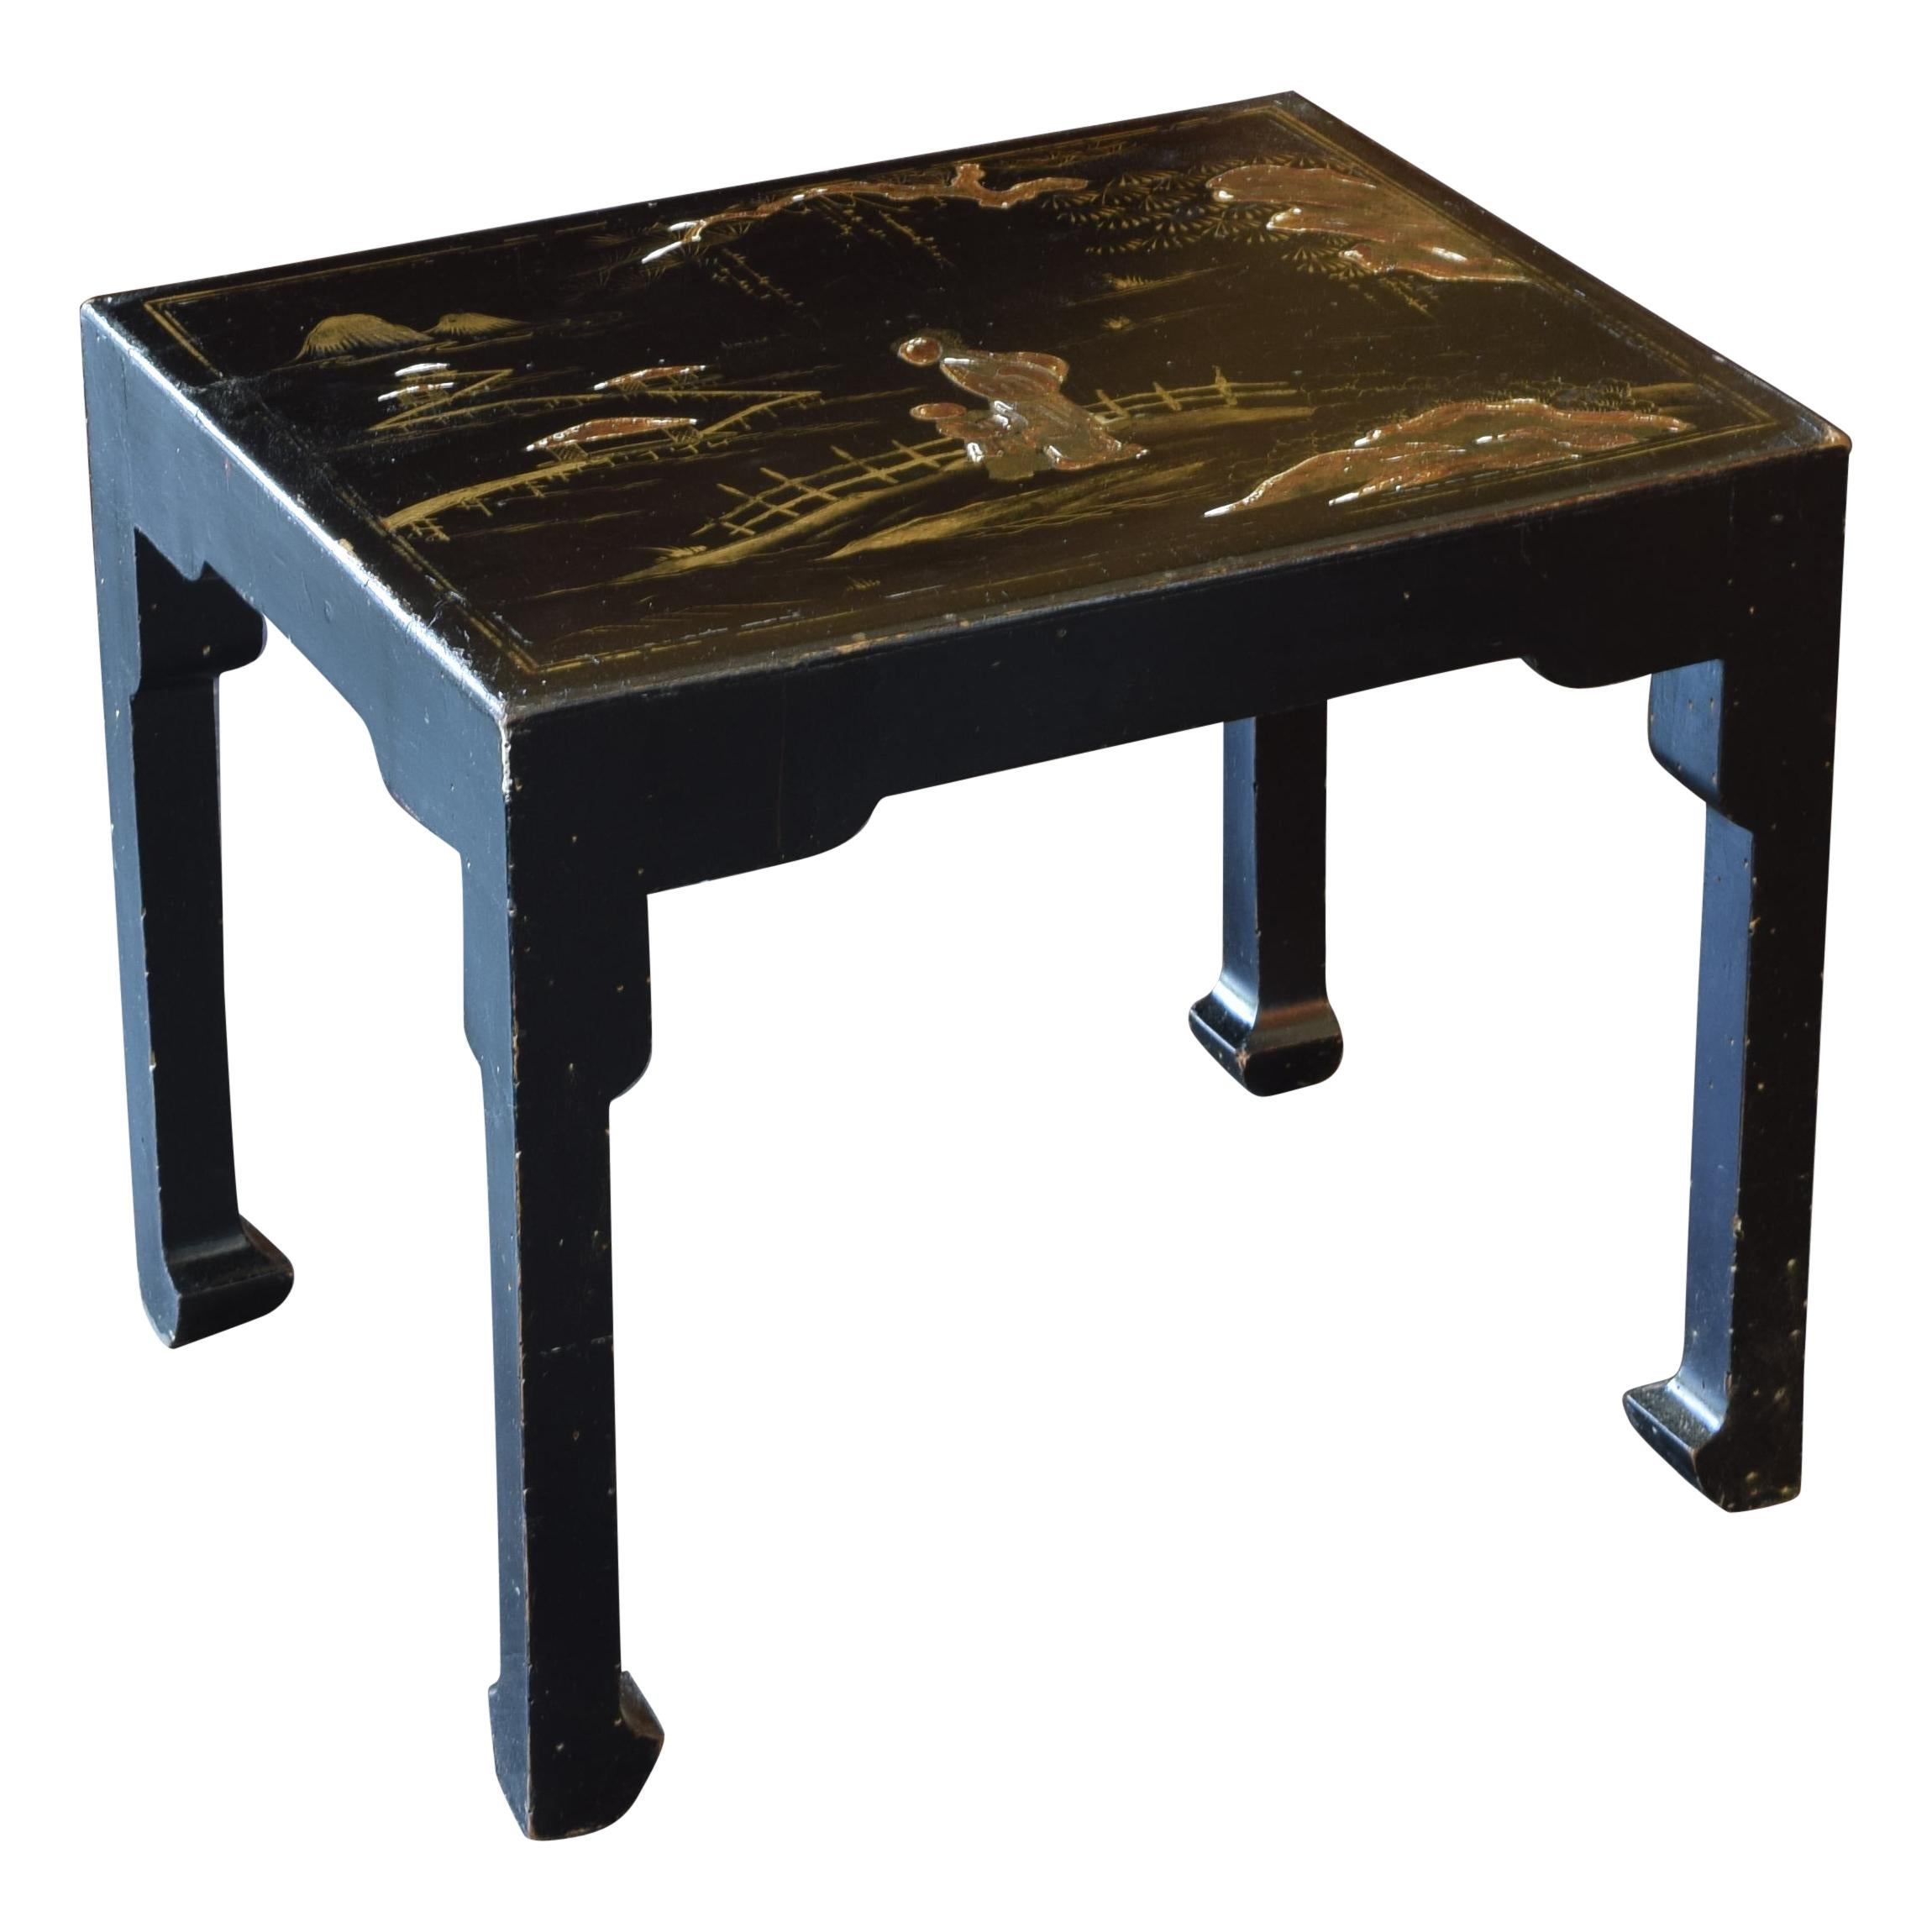 English Queen Anne Style Ebonized & Raised Gilt Chinoiserie Low Table, 2q 20thc